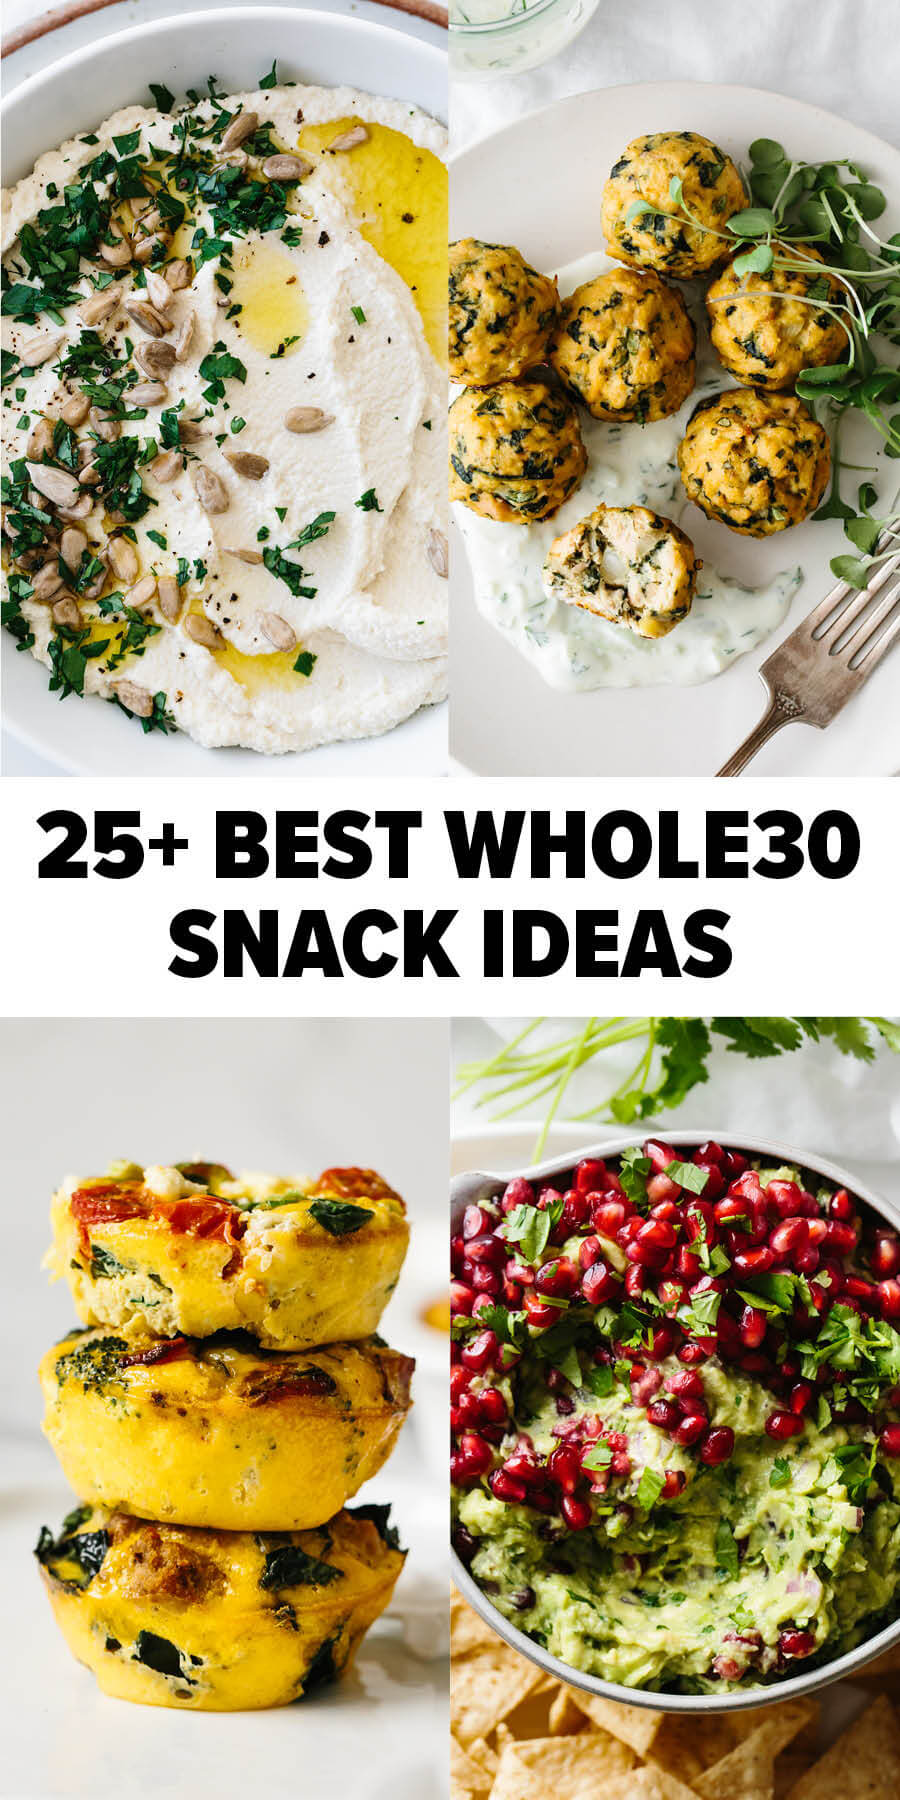 Best whole30 snack ideas.